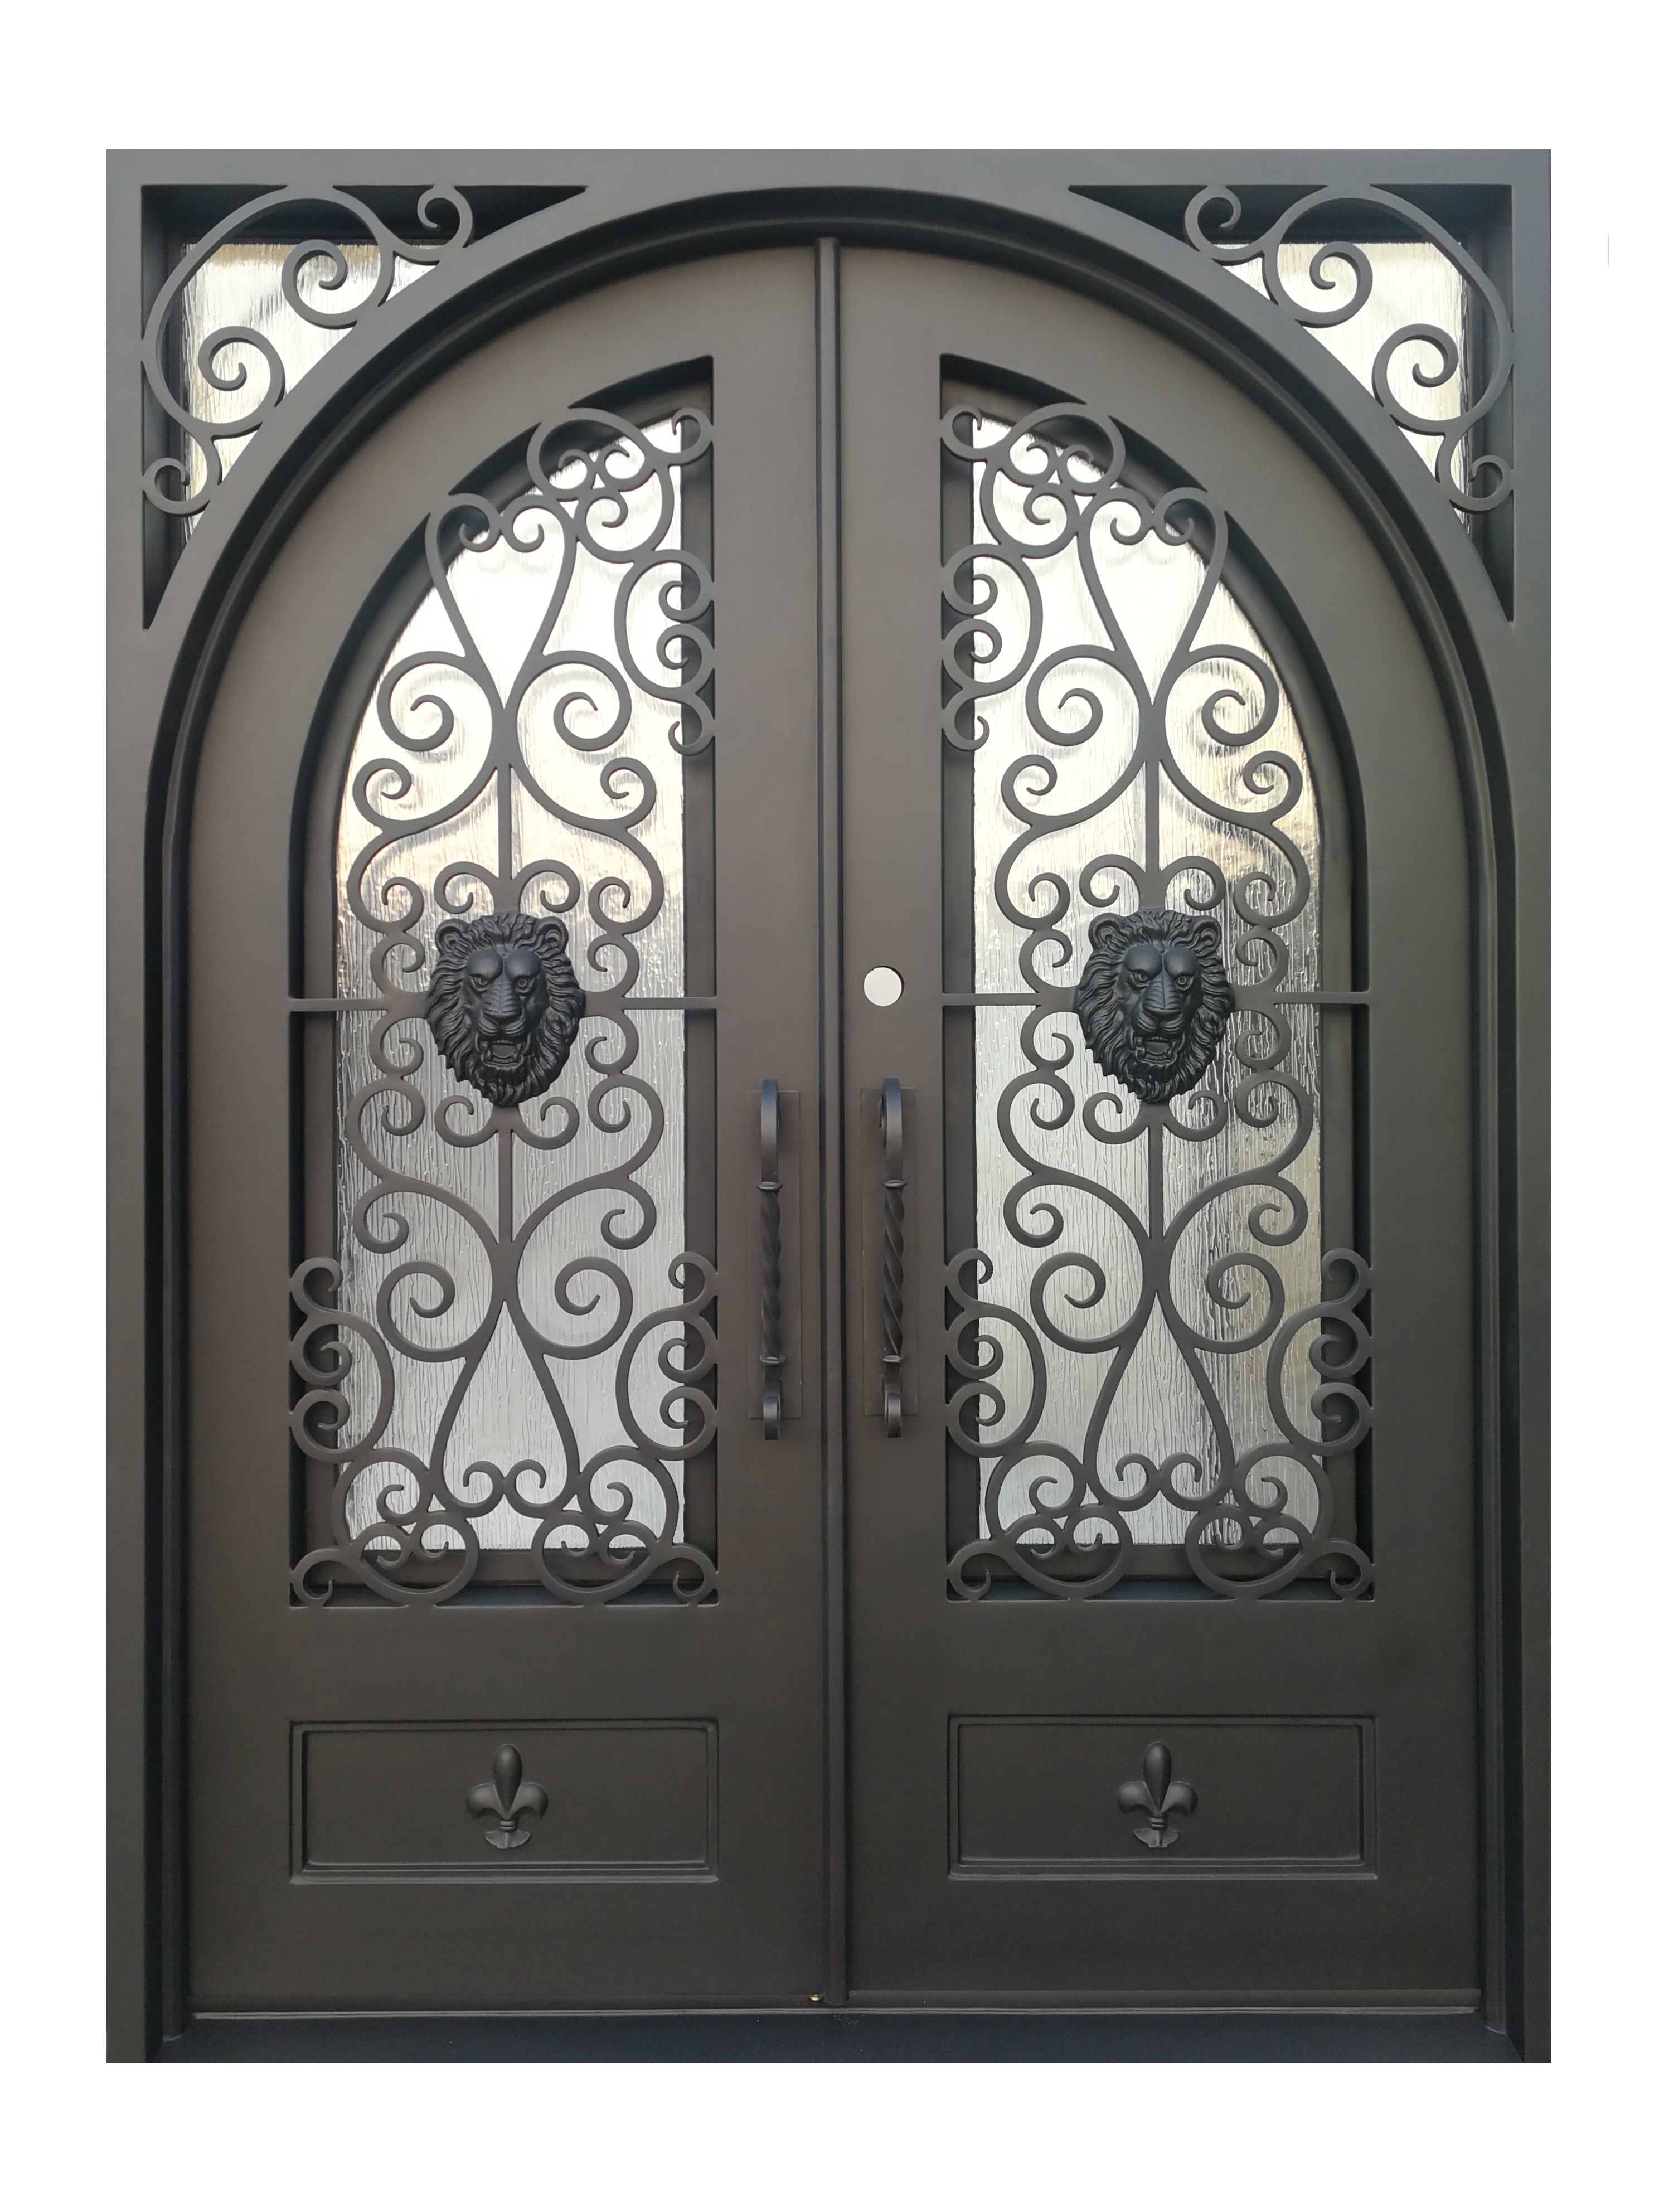 Coppell Model Double Front Entry Iron Door With Tempered Rain Glass Dark Bronze Finish - AAWAIZ IMPORTS